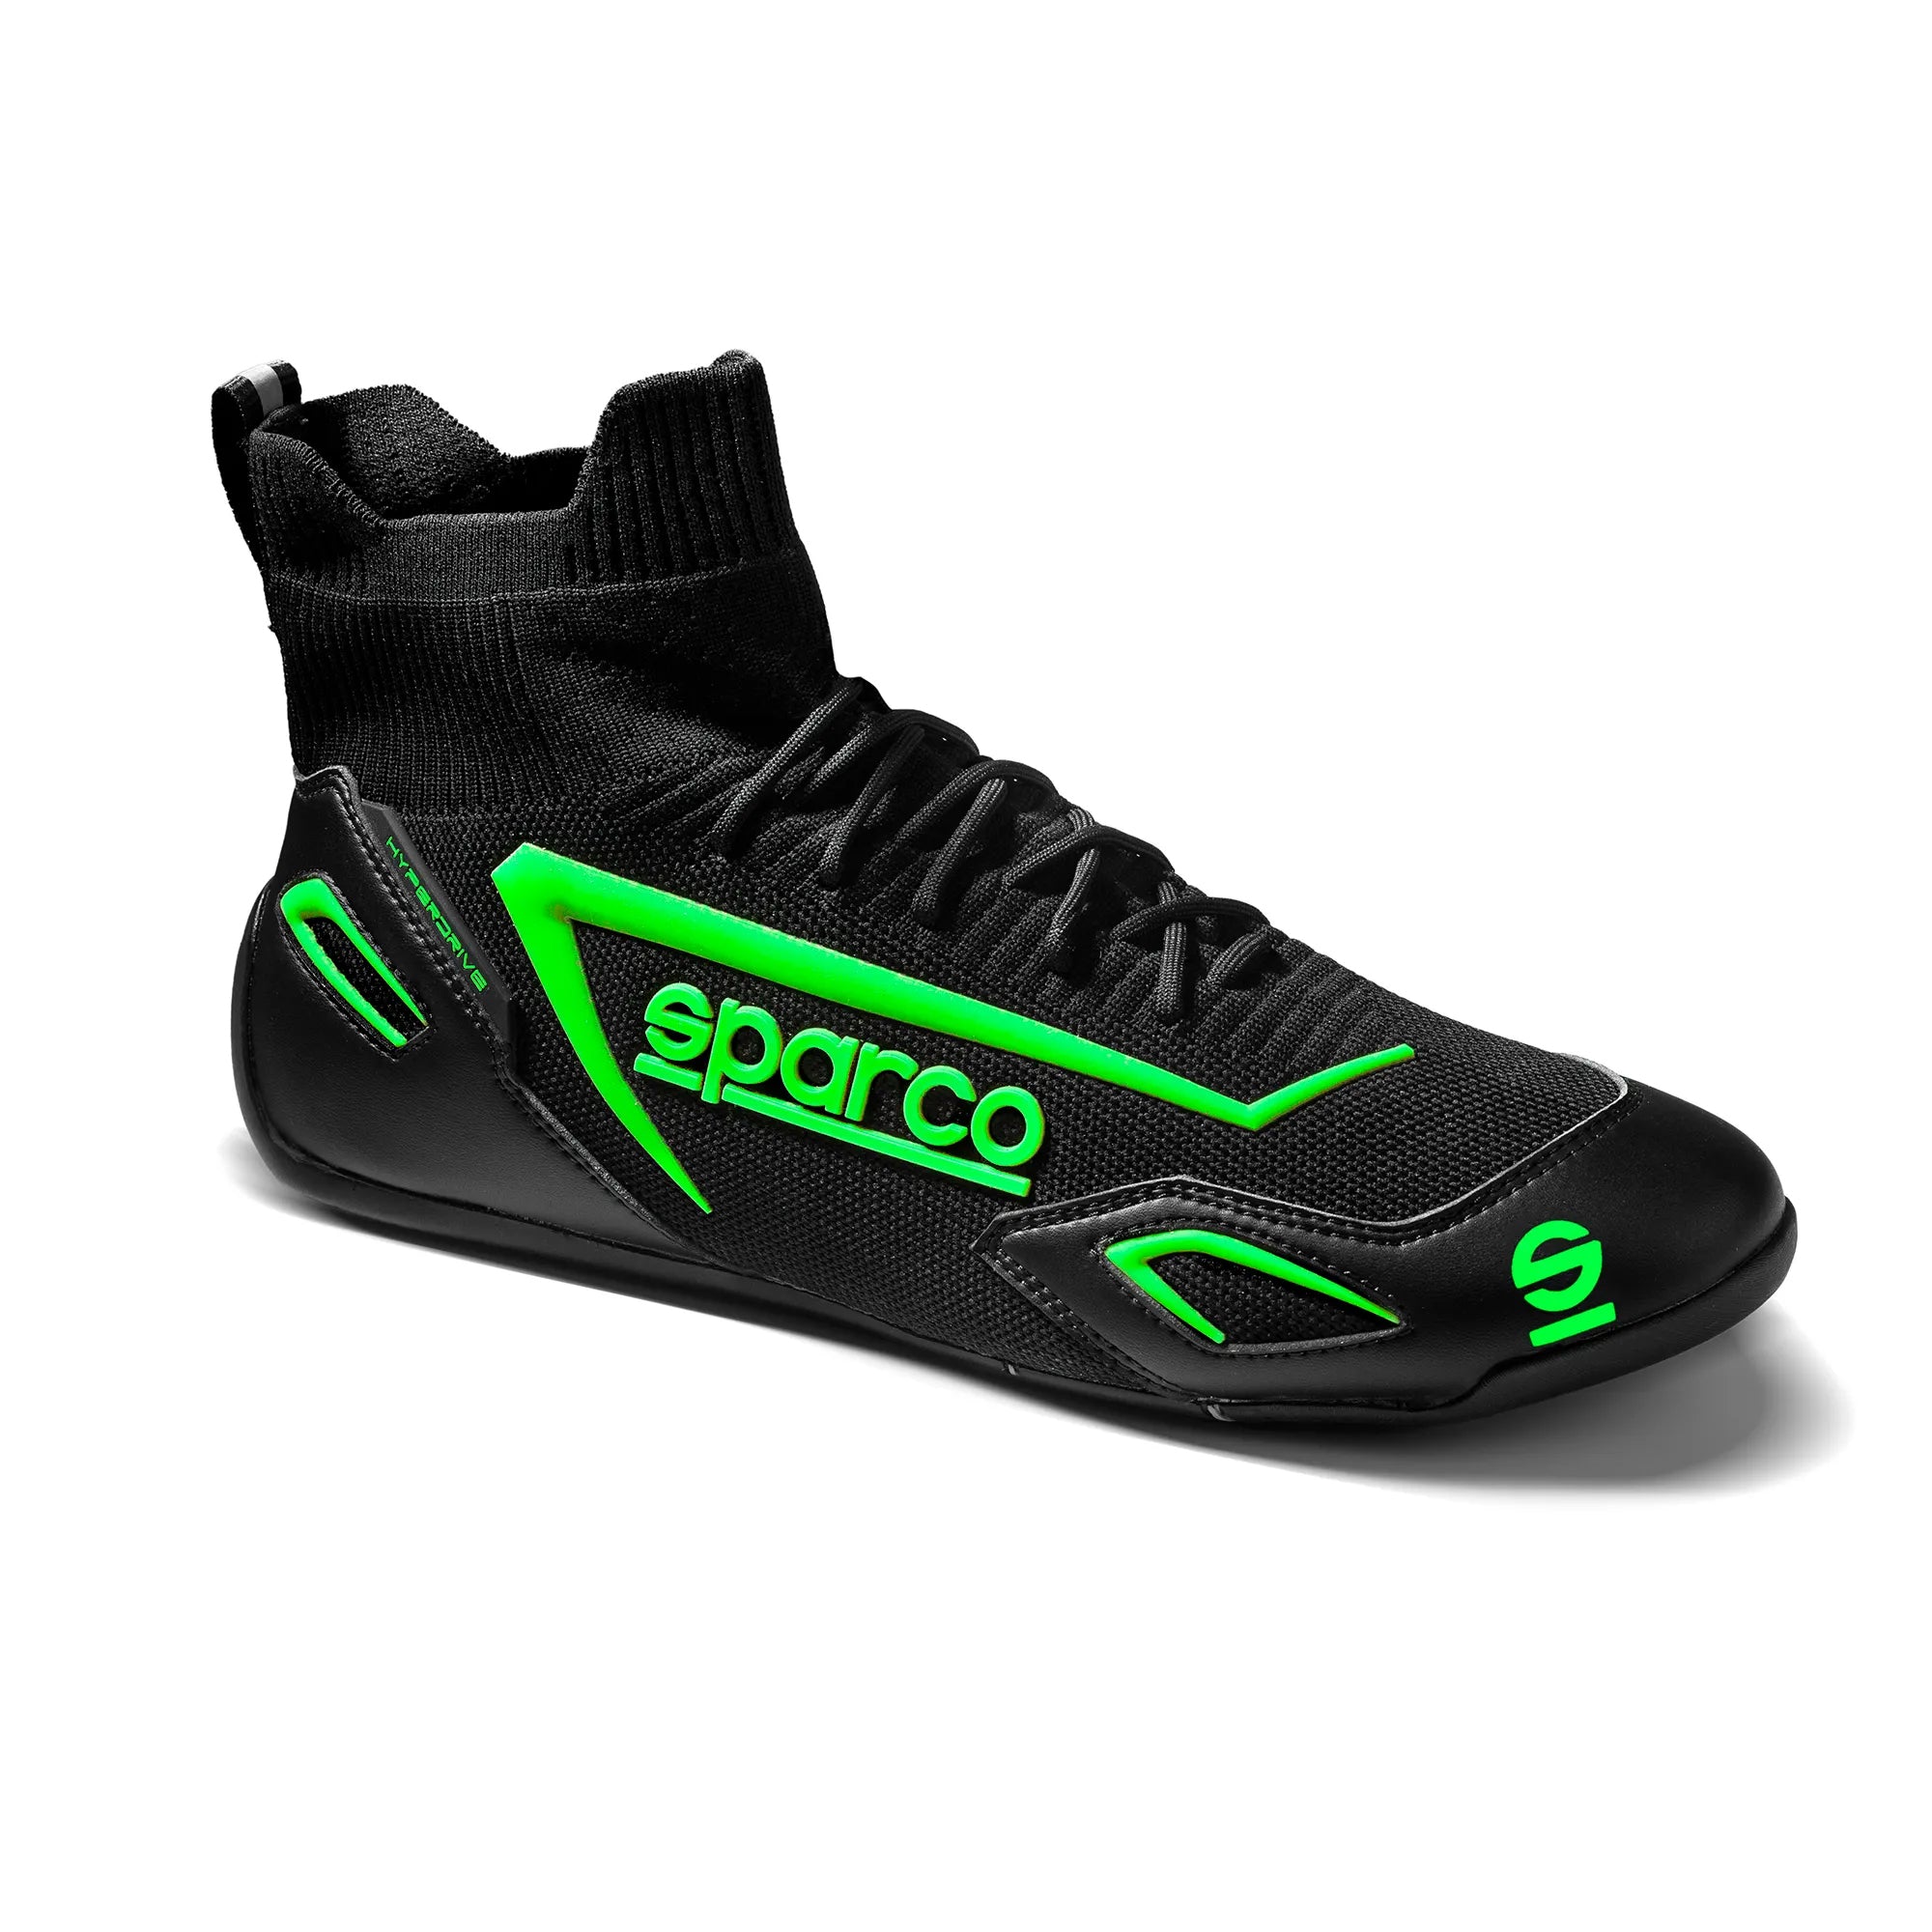 SPARCO 00129346NRVF Gaming sim racing shoes HYPERDRIVE, black/green, size 46 Photo-1 